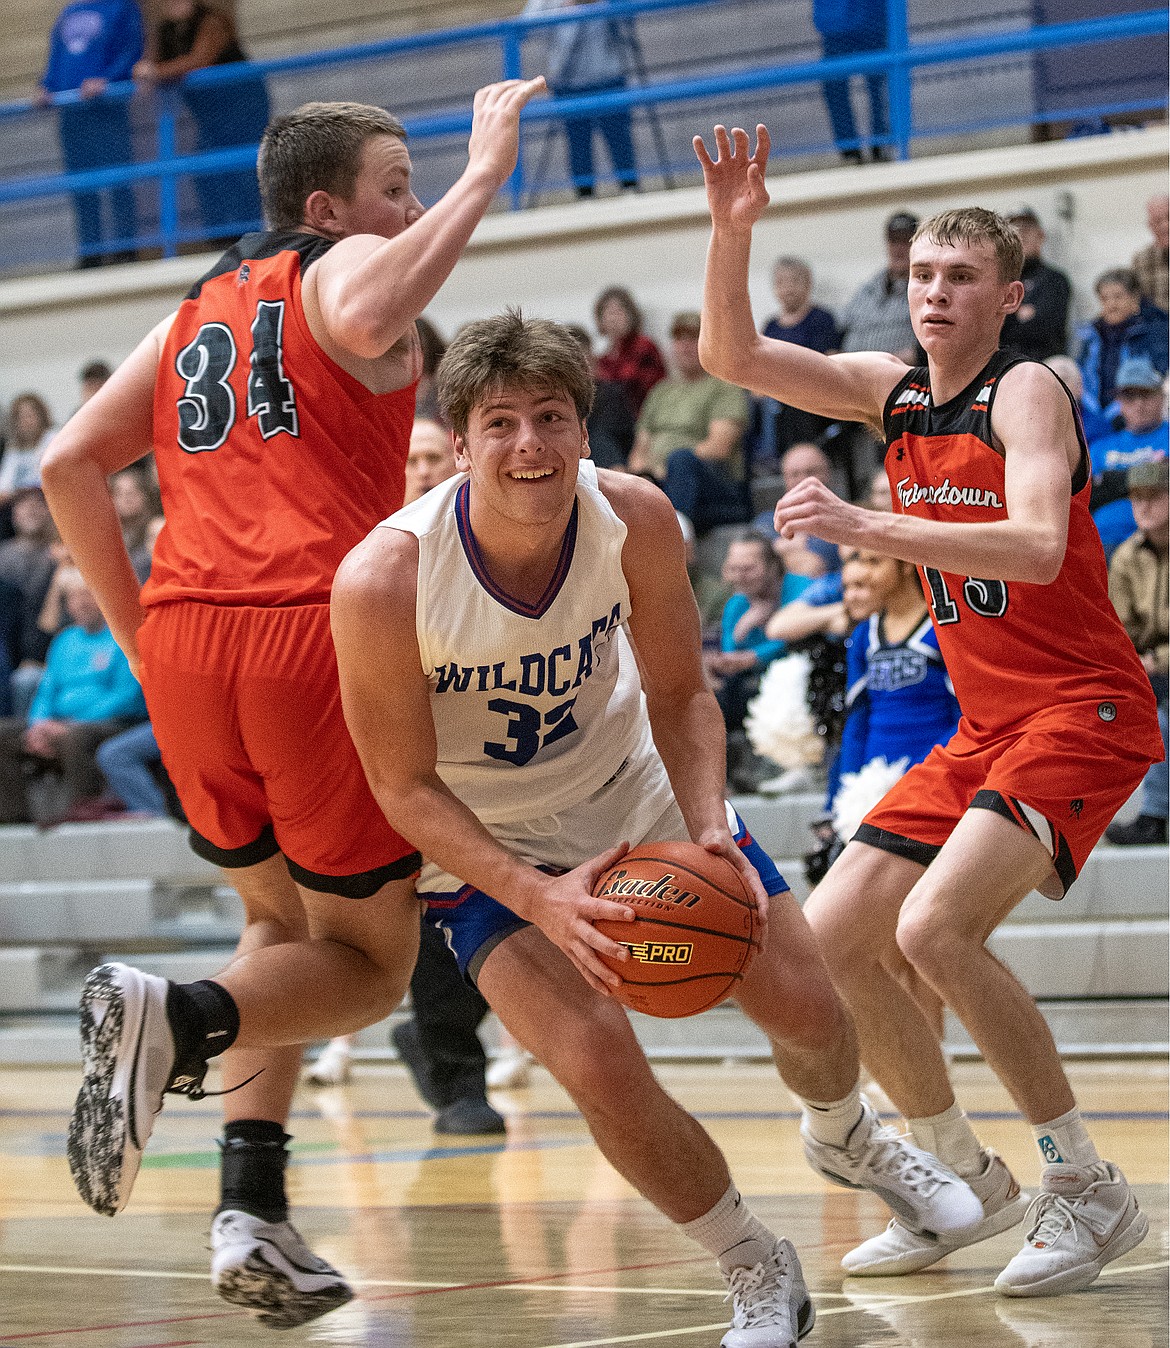 Cody Schweikert pushes through Frenchtown’s defense under the basket on Tuesday, Dec. 19. (Avery Howe photo)